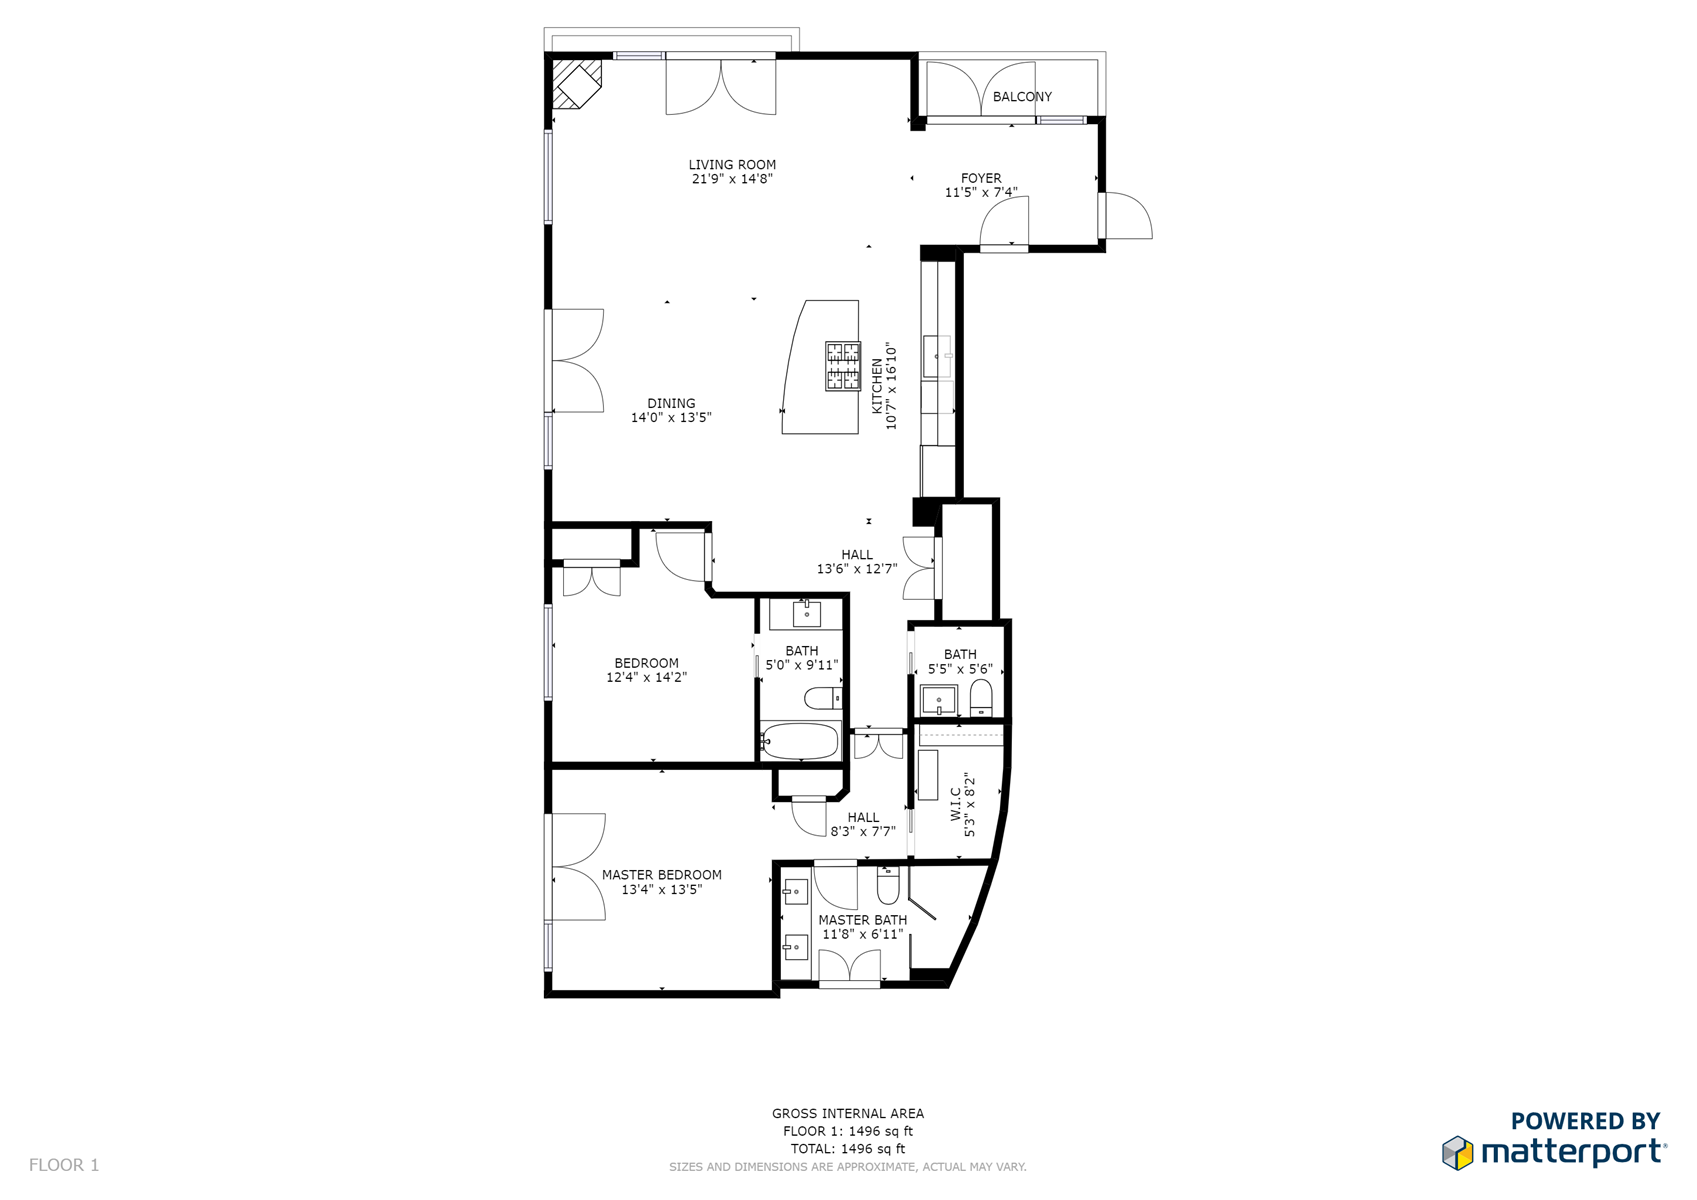 Floor Plan for The Lincoln 501, 2 Bed / 2.5 Bath, Luxury Condo (Fragrance/Allergen Free)